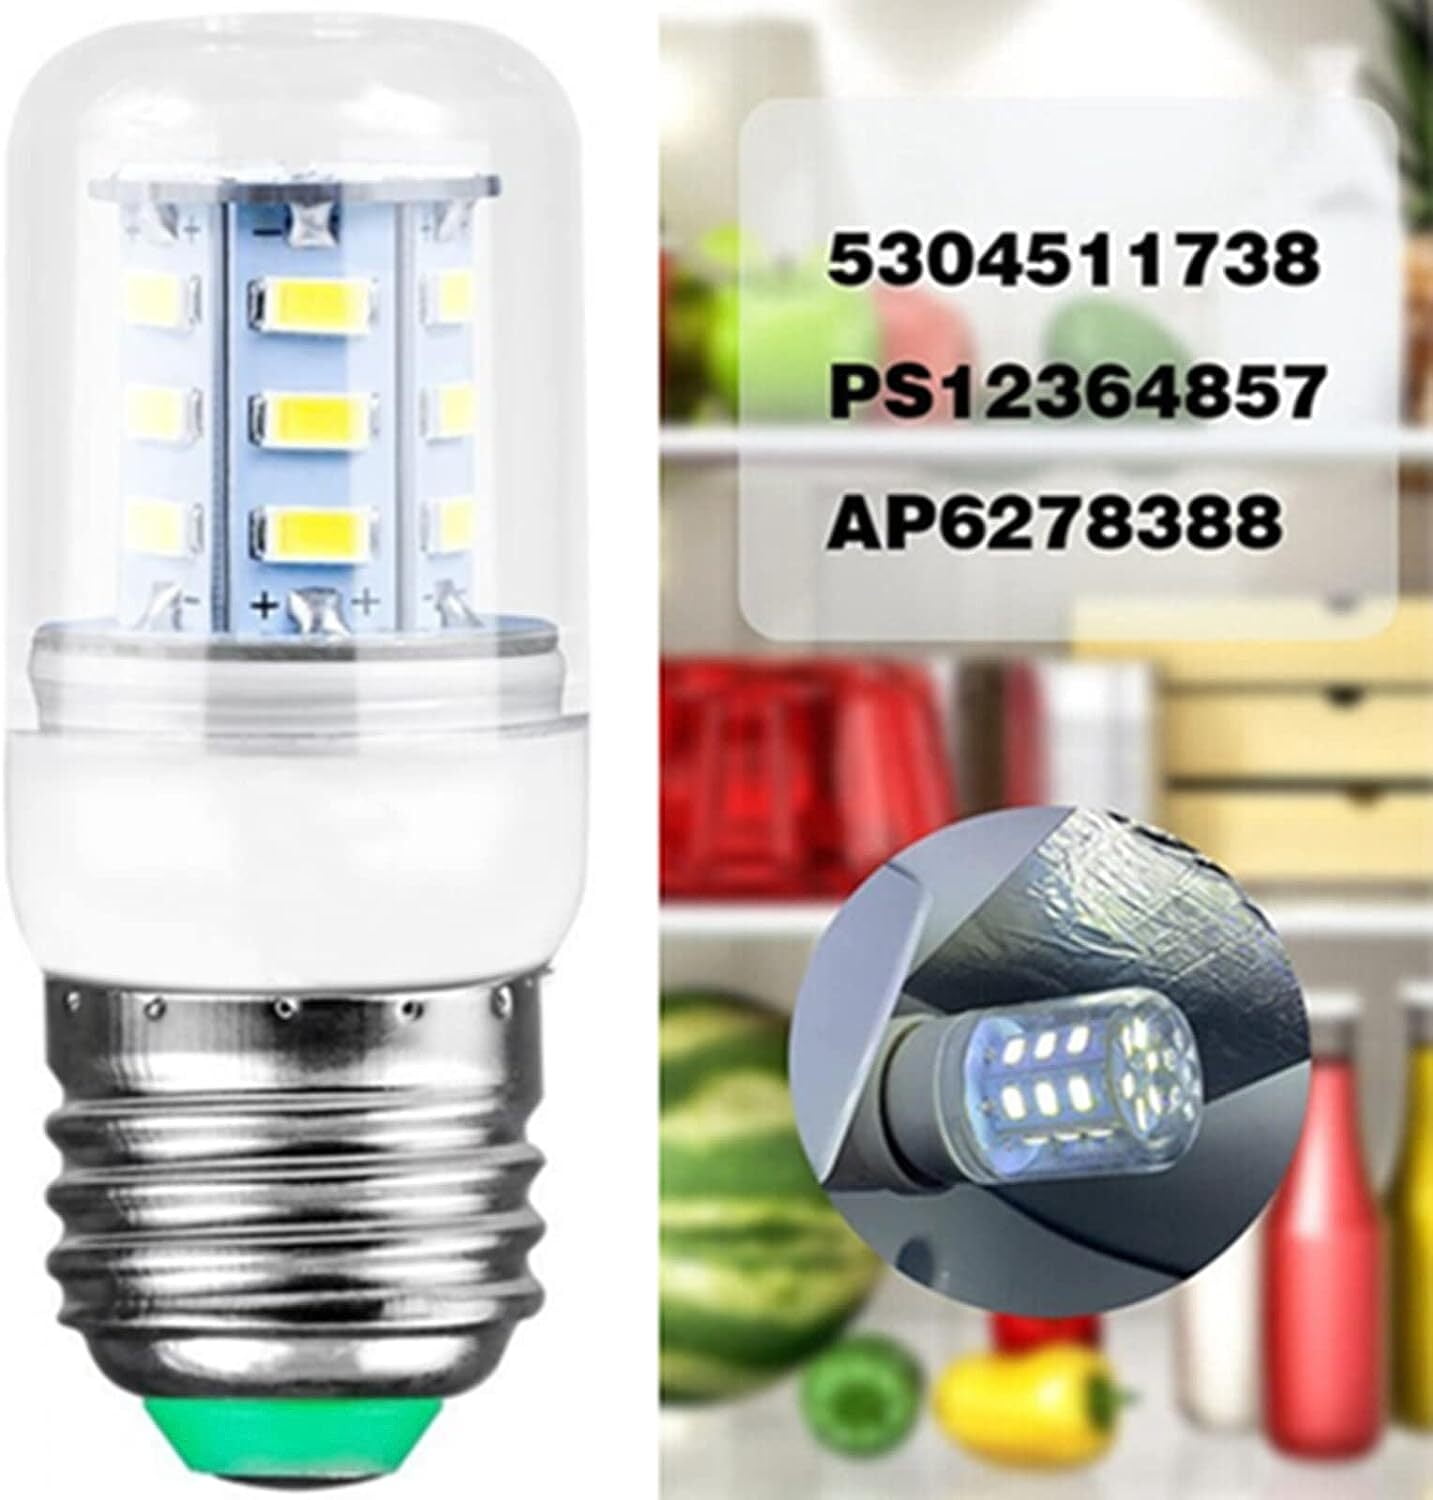 Yooank Upgraded Kei D34L Refrigerator Bulb Replacement for Electrolux Frigidaire Refrigerator LED Light Bulb